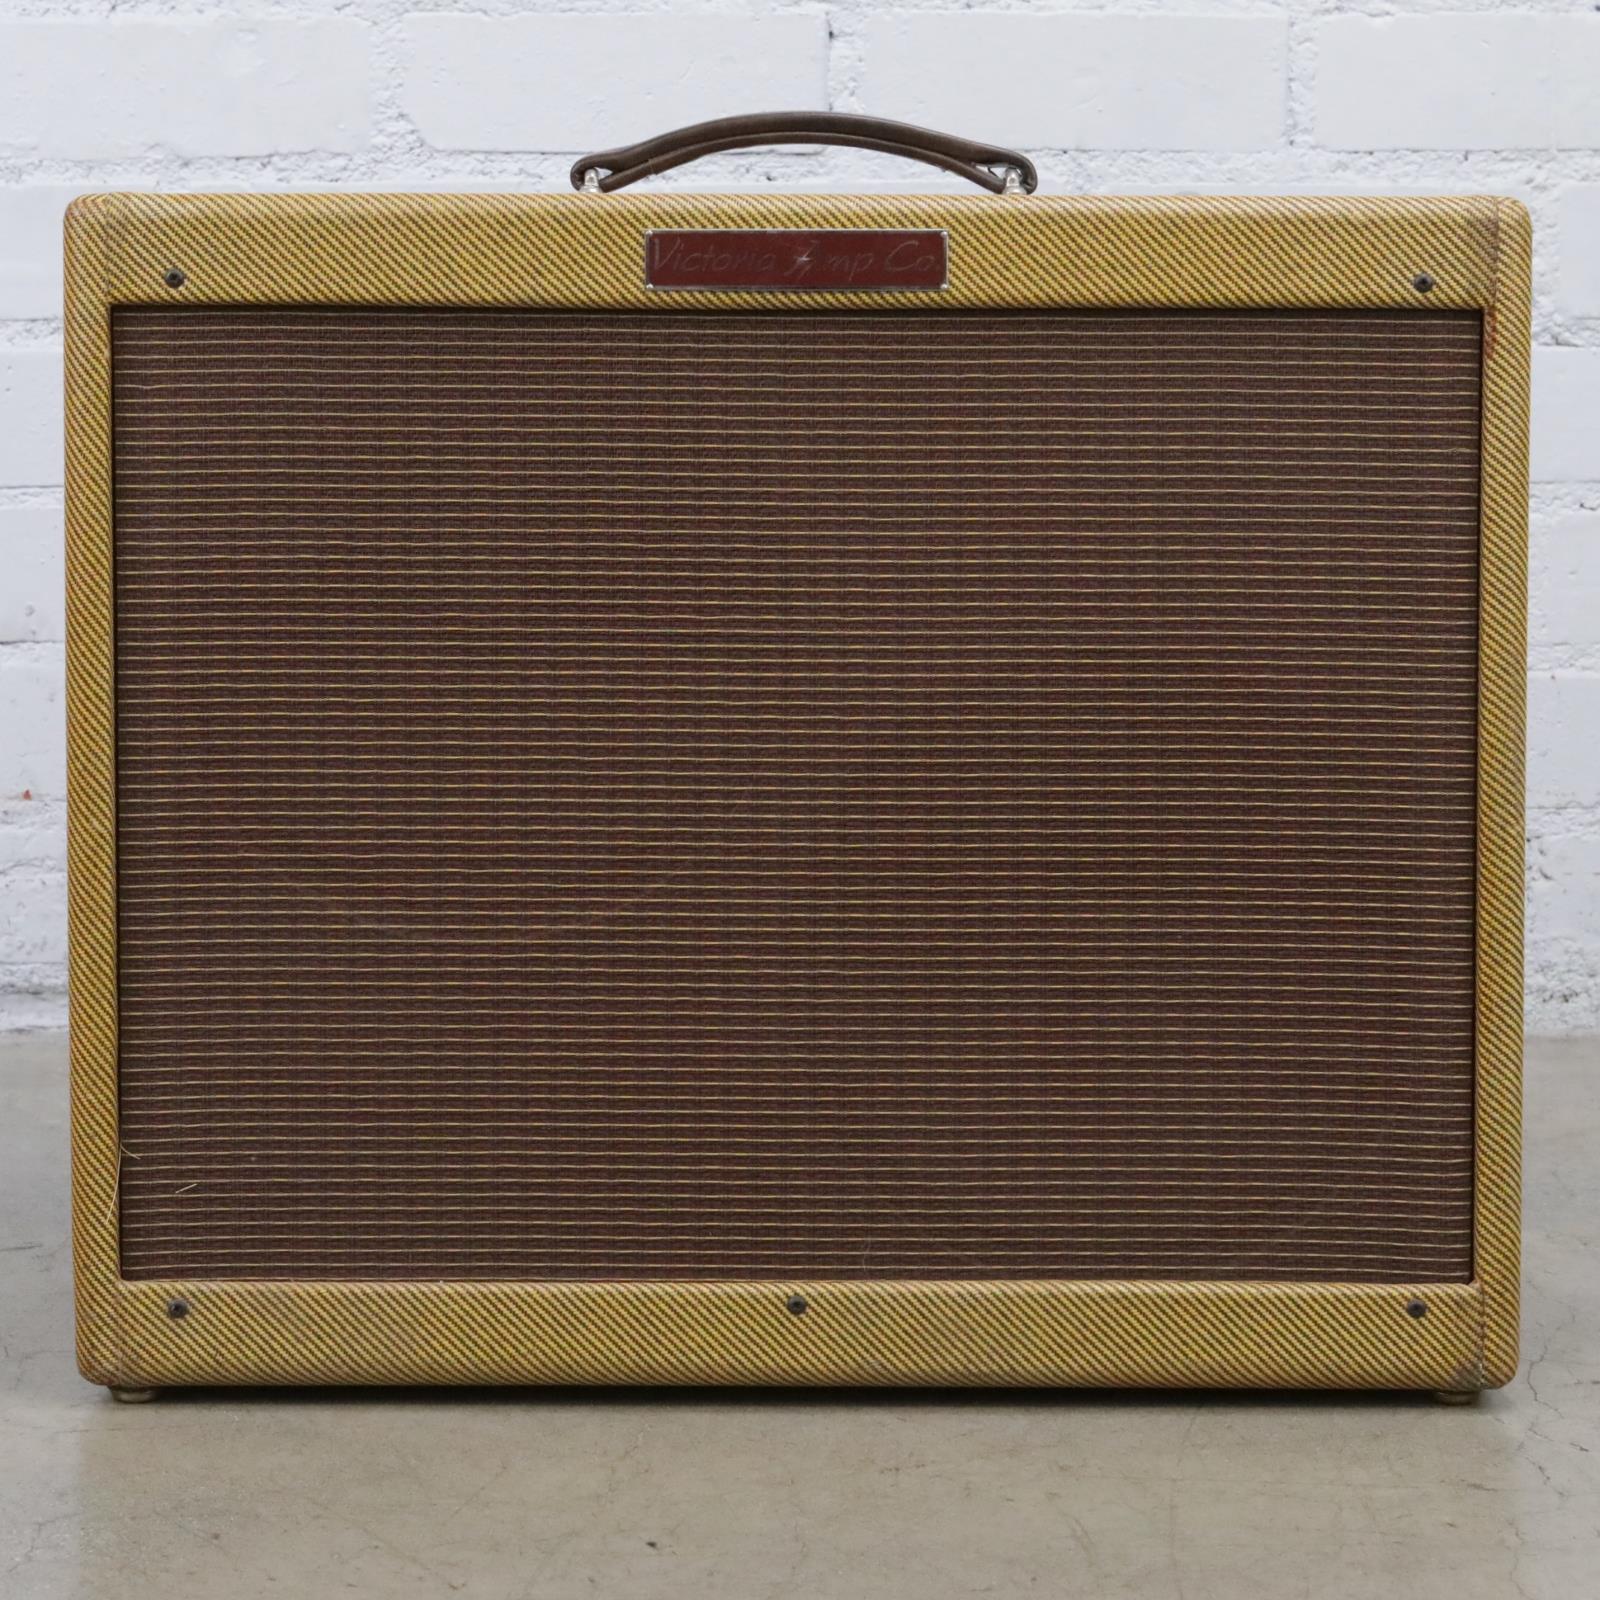 Victoria Amp Co. Double Deluxe 2x12 High Power Tube Guitar Combo Amp #47969